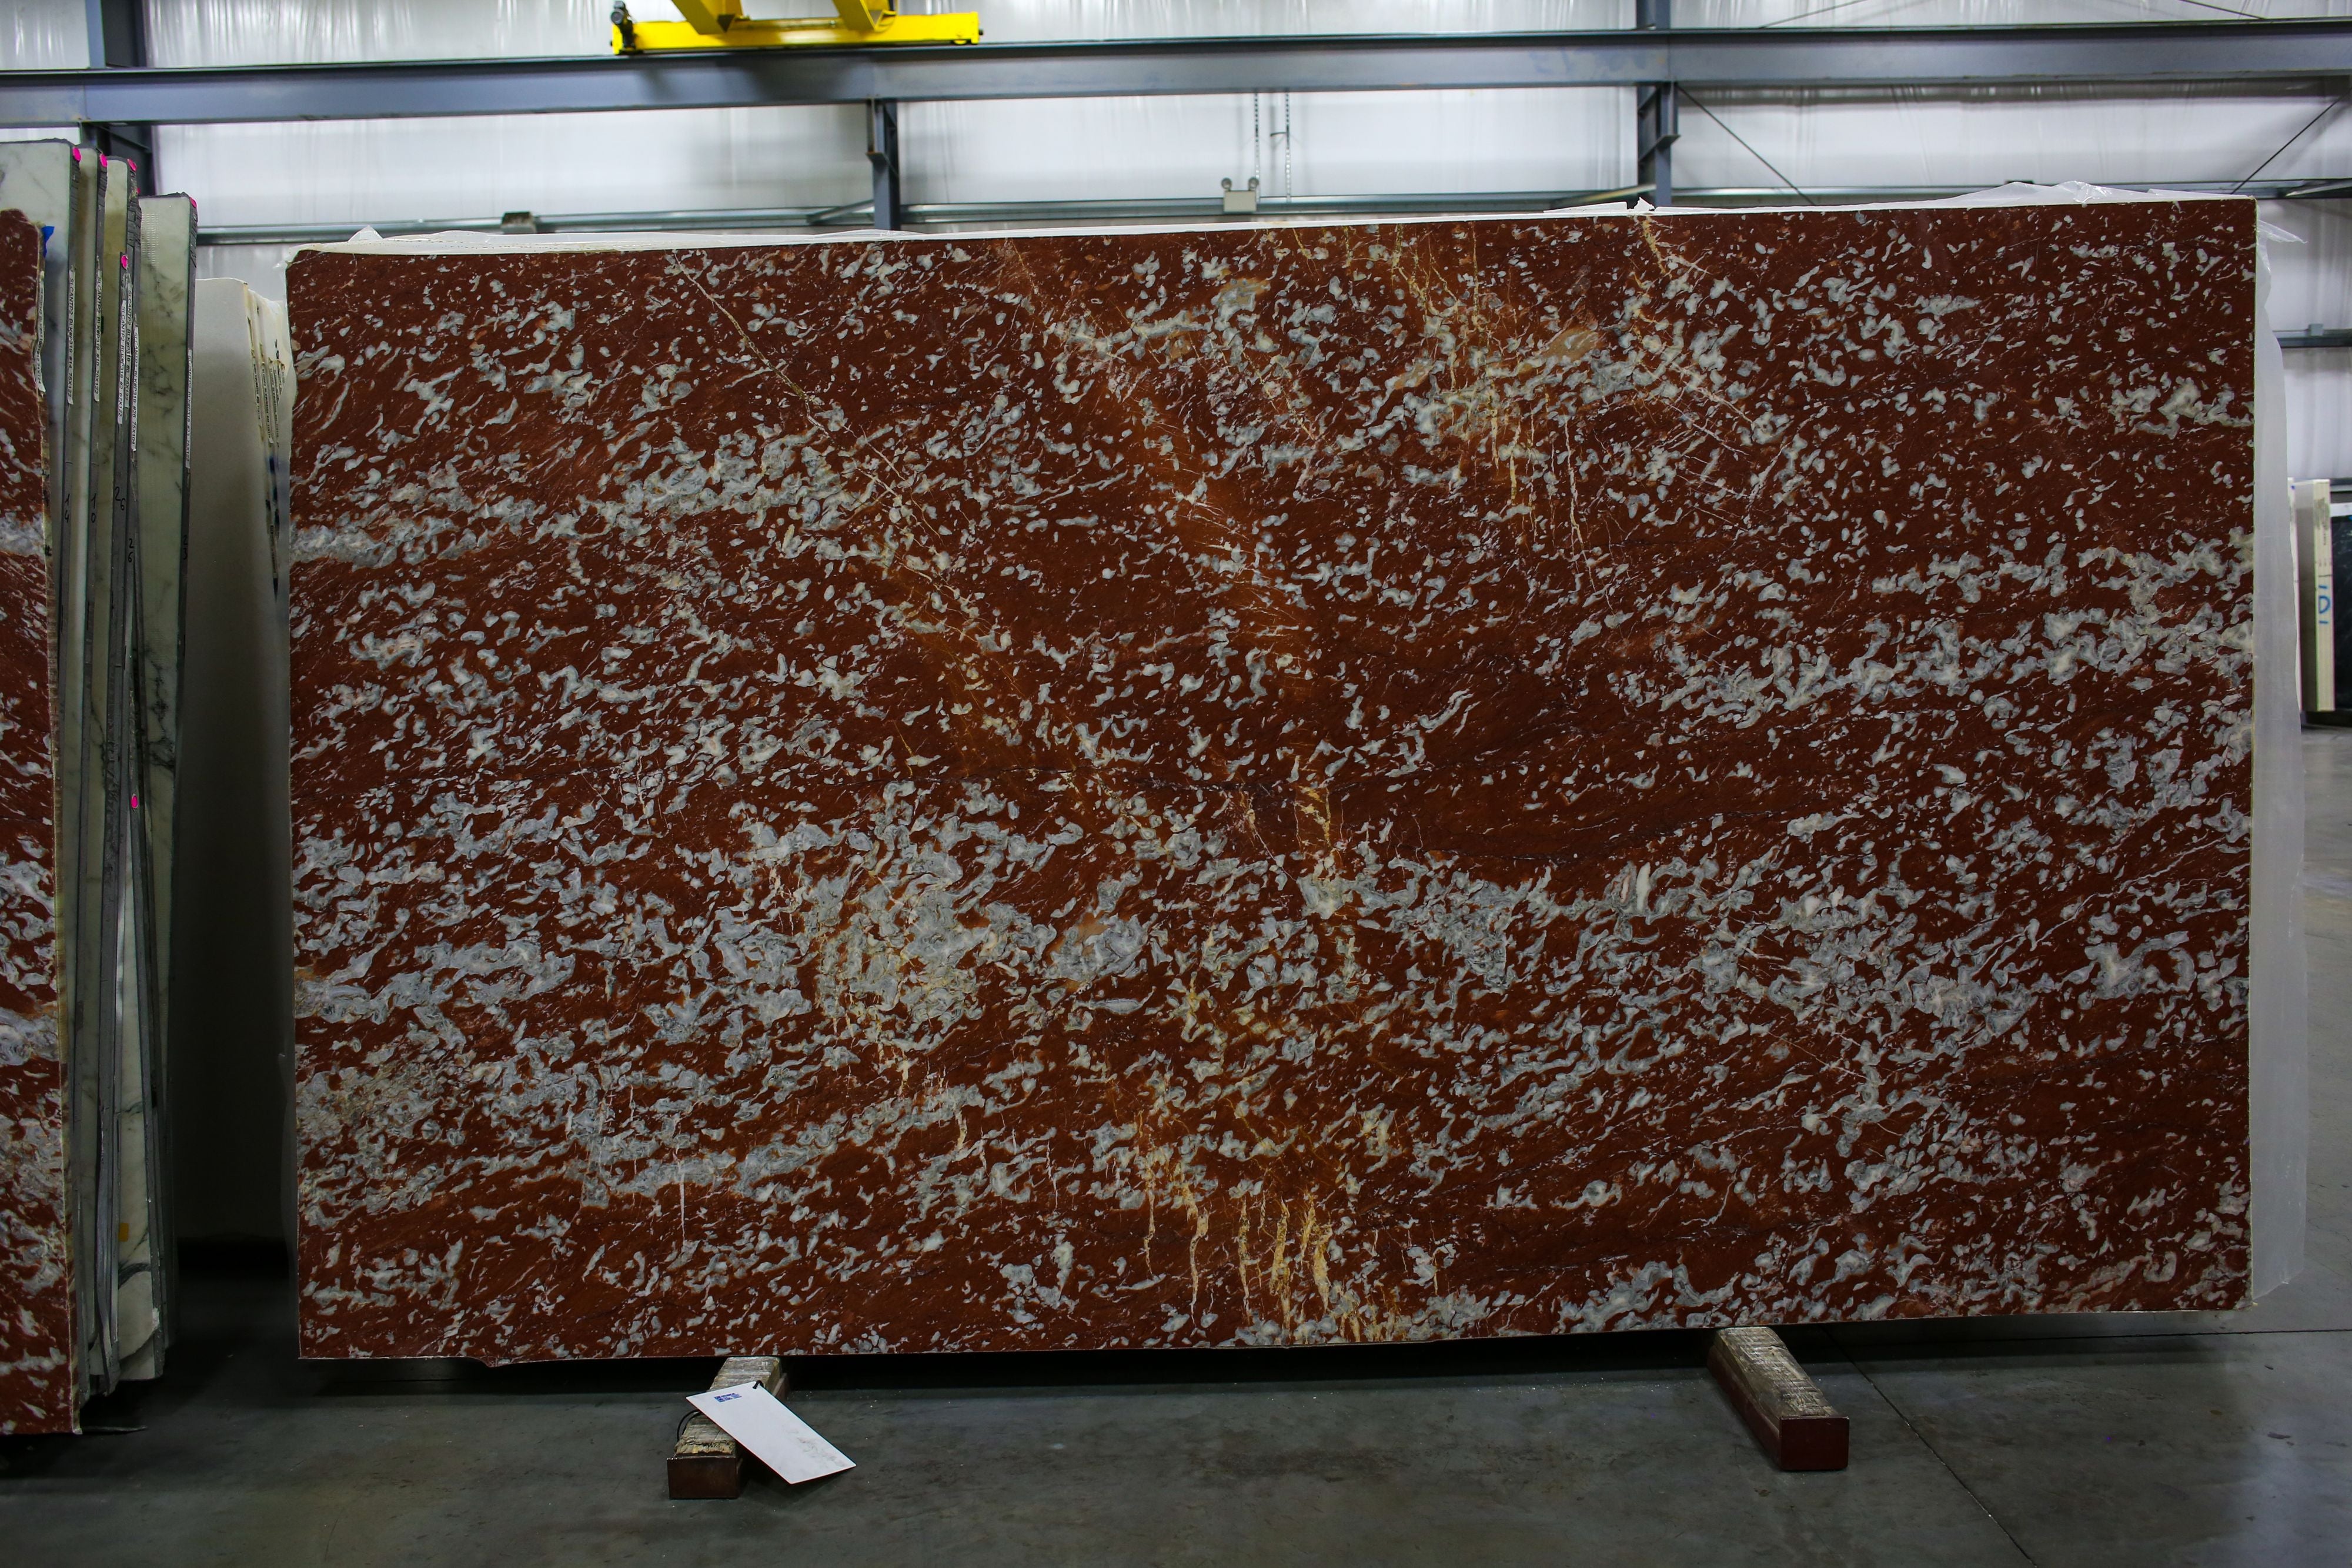  Rosso Francia Marble Slab 3/4  Honed Stone - 55190#11 -  71X112 